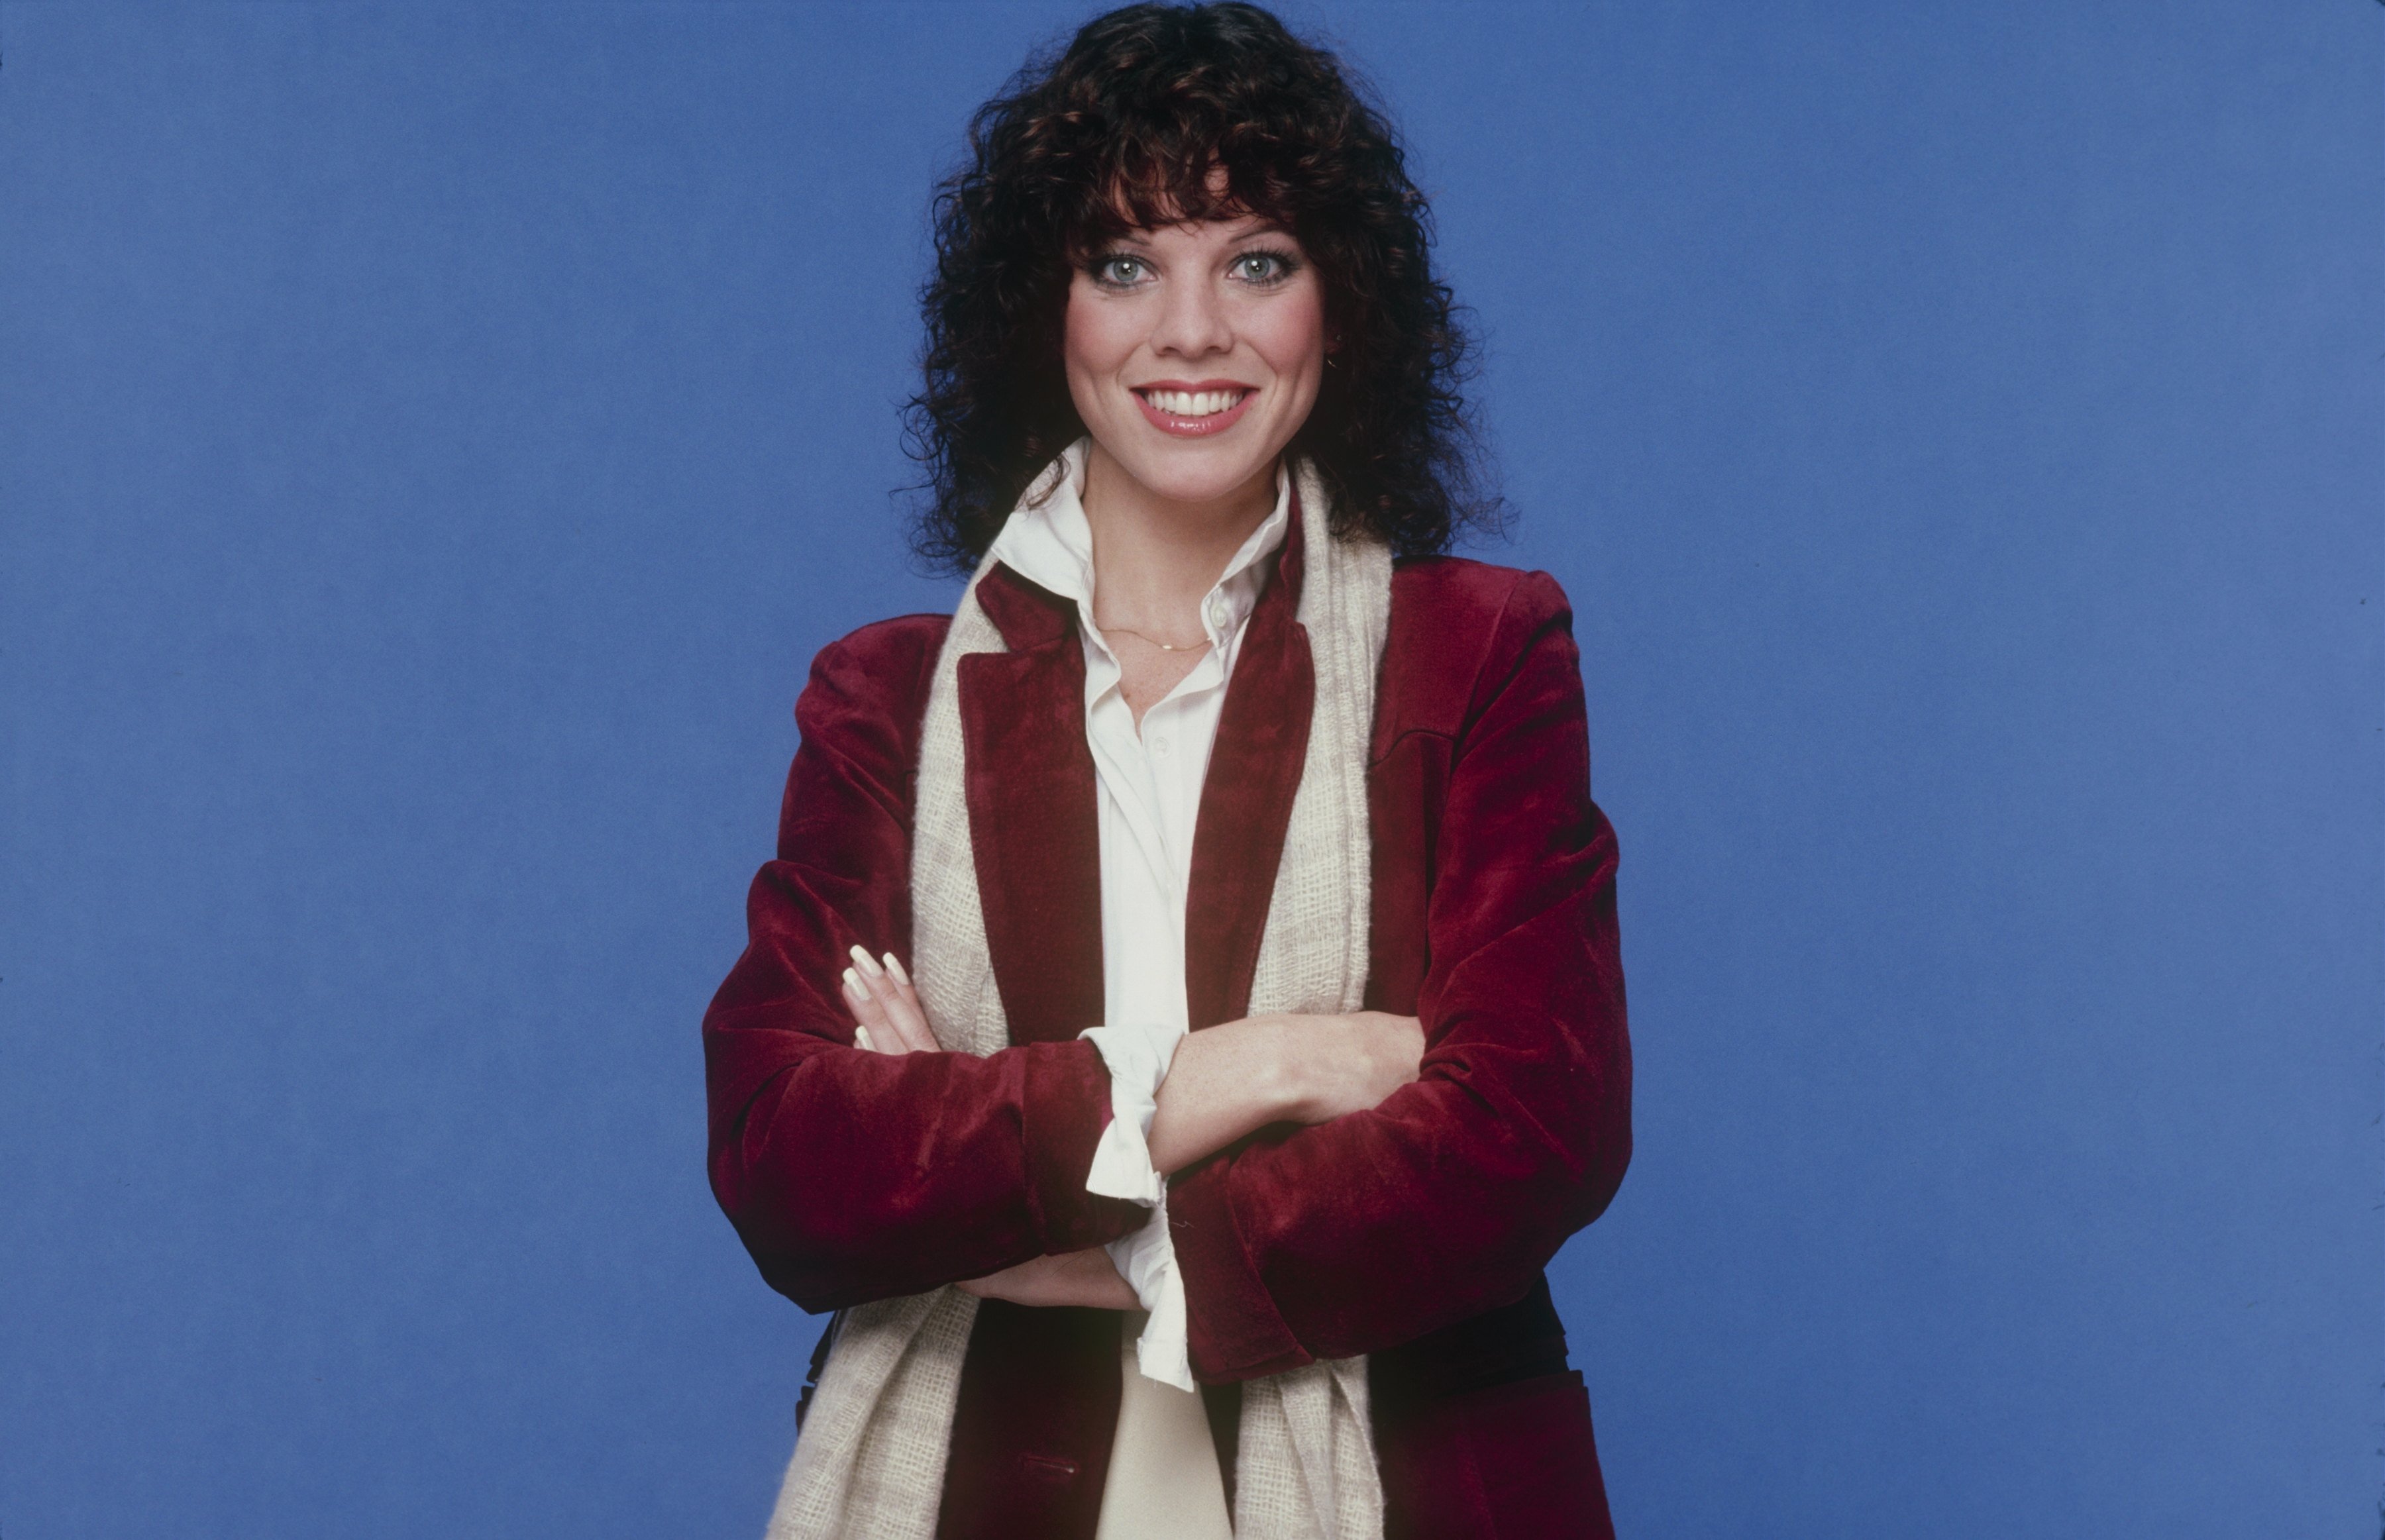 Erin Moran on "Happy Days" in 1981. | Source: Getty Images 